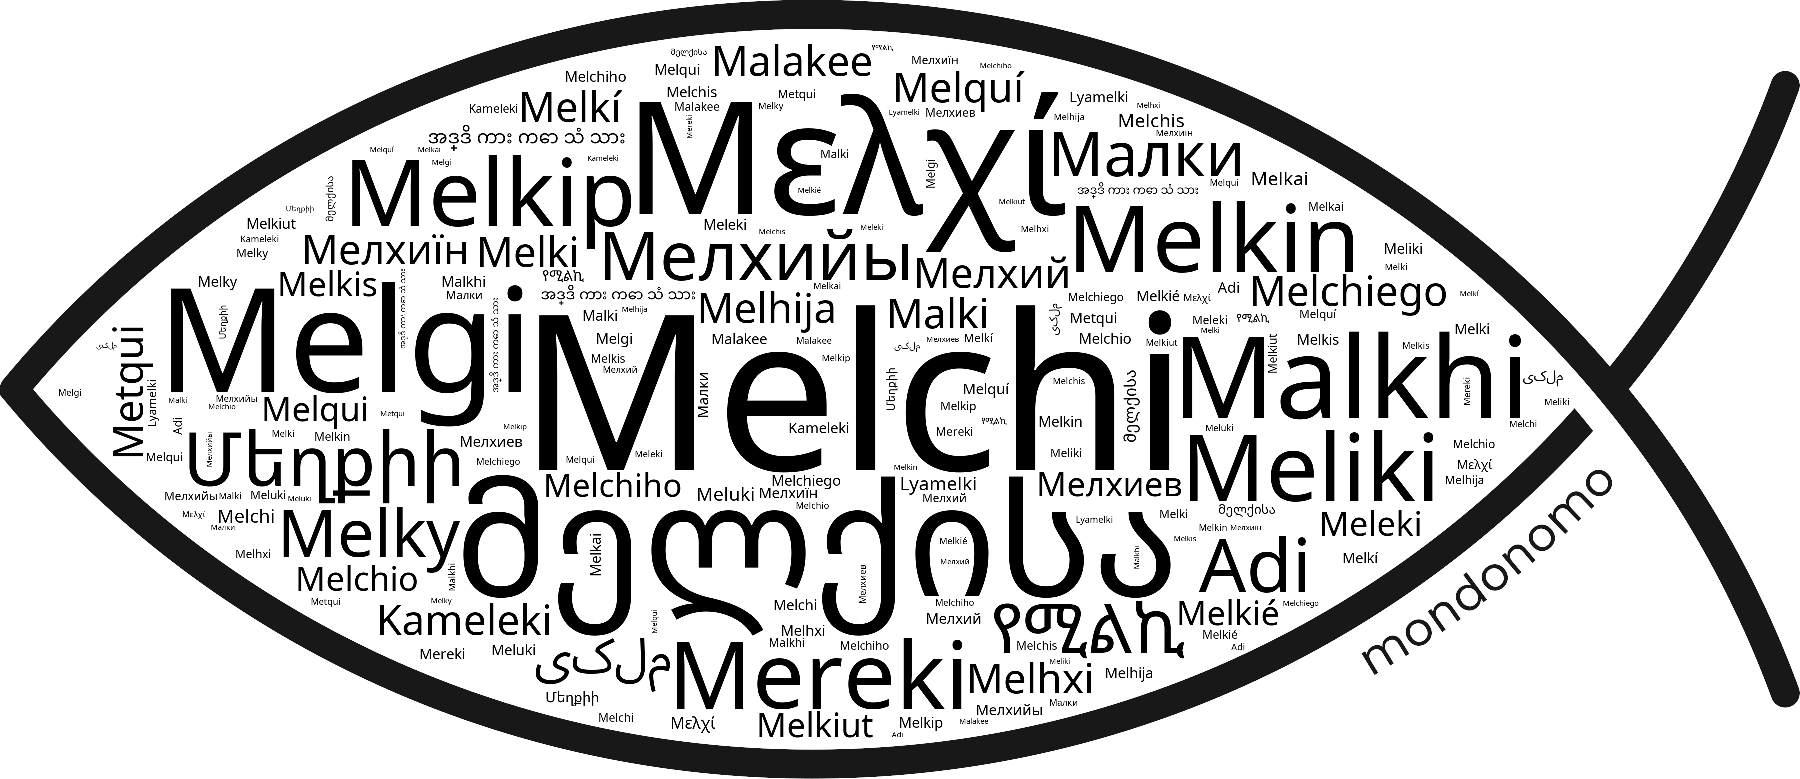 Name Melchi in the world's Bibles